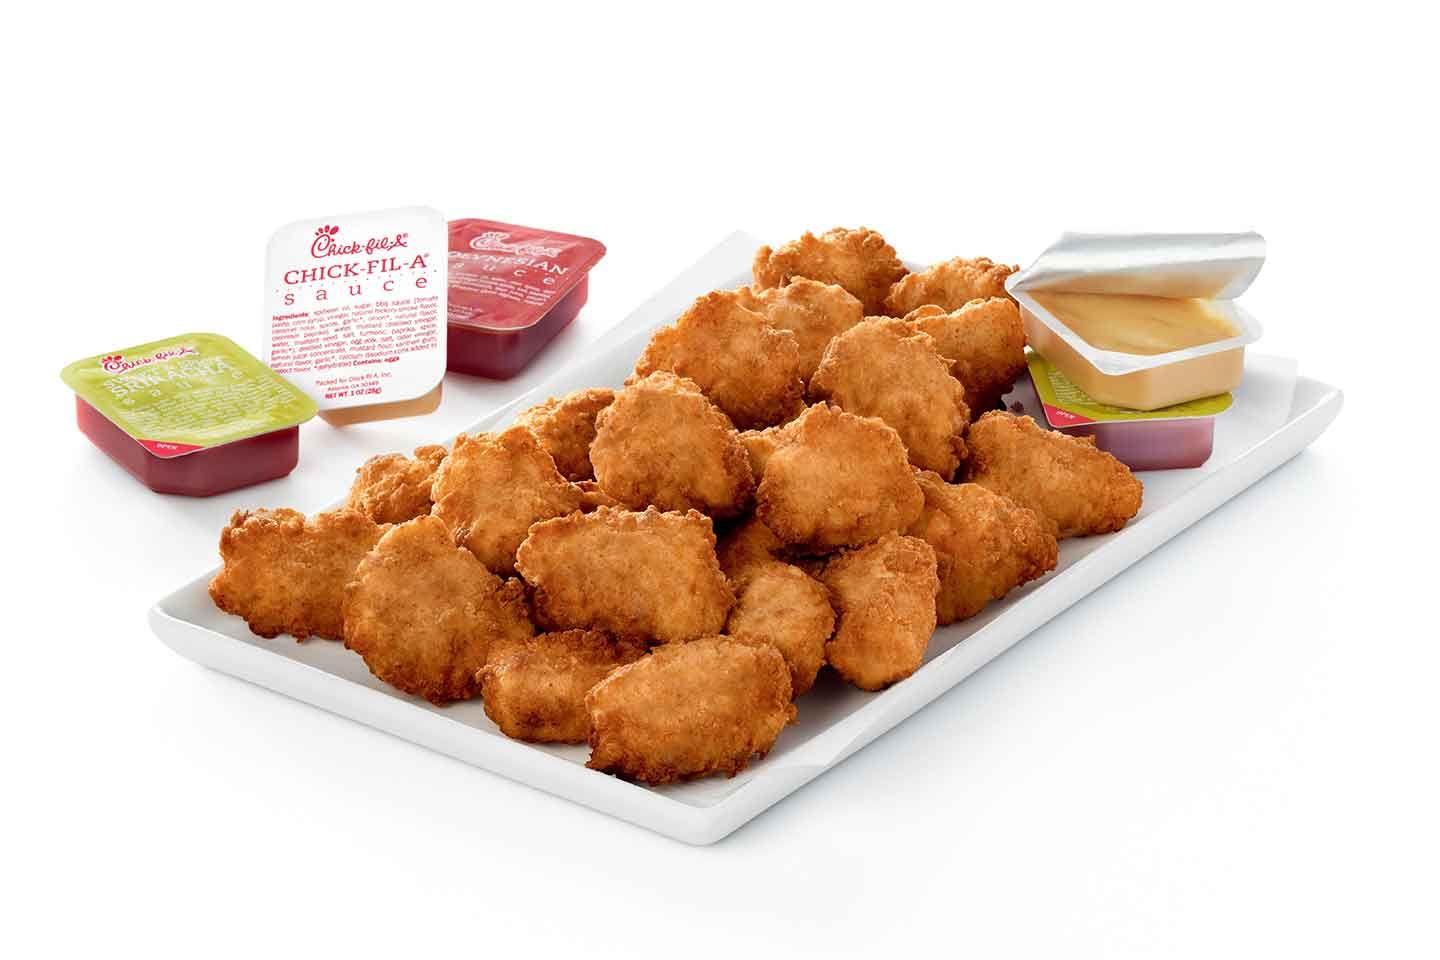 People Are Reporting Their Local Chick-fil-A Locations Have Ran Out of Chicken Nuggets